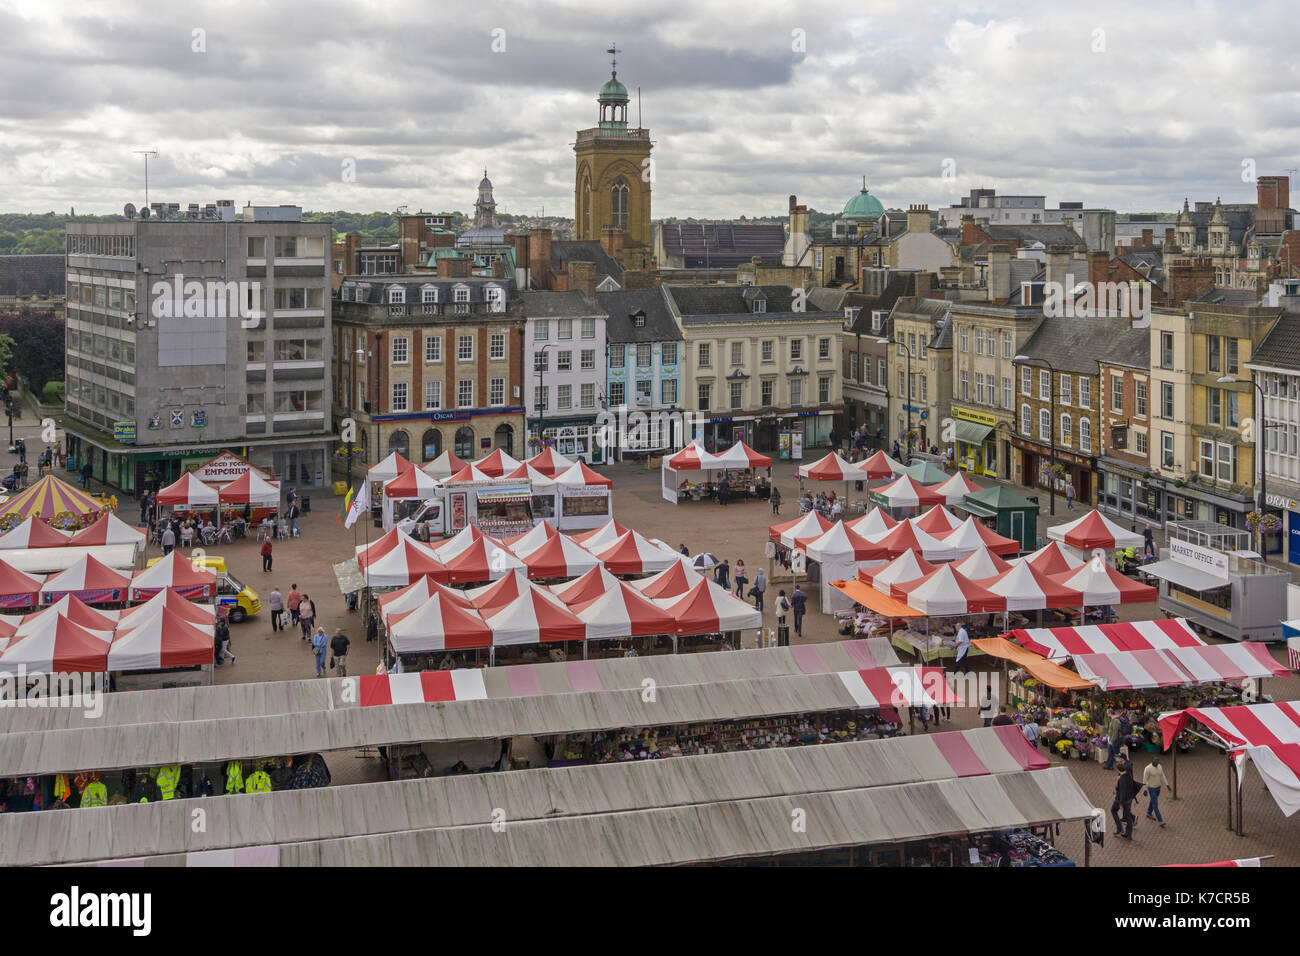 Looking down on the colourful stalls of the Market Square, Northampton, UK; one of the oldest and largest in England, it dates from 1235 Stock Photo